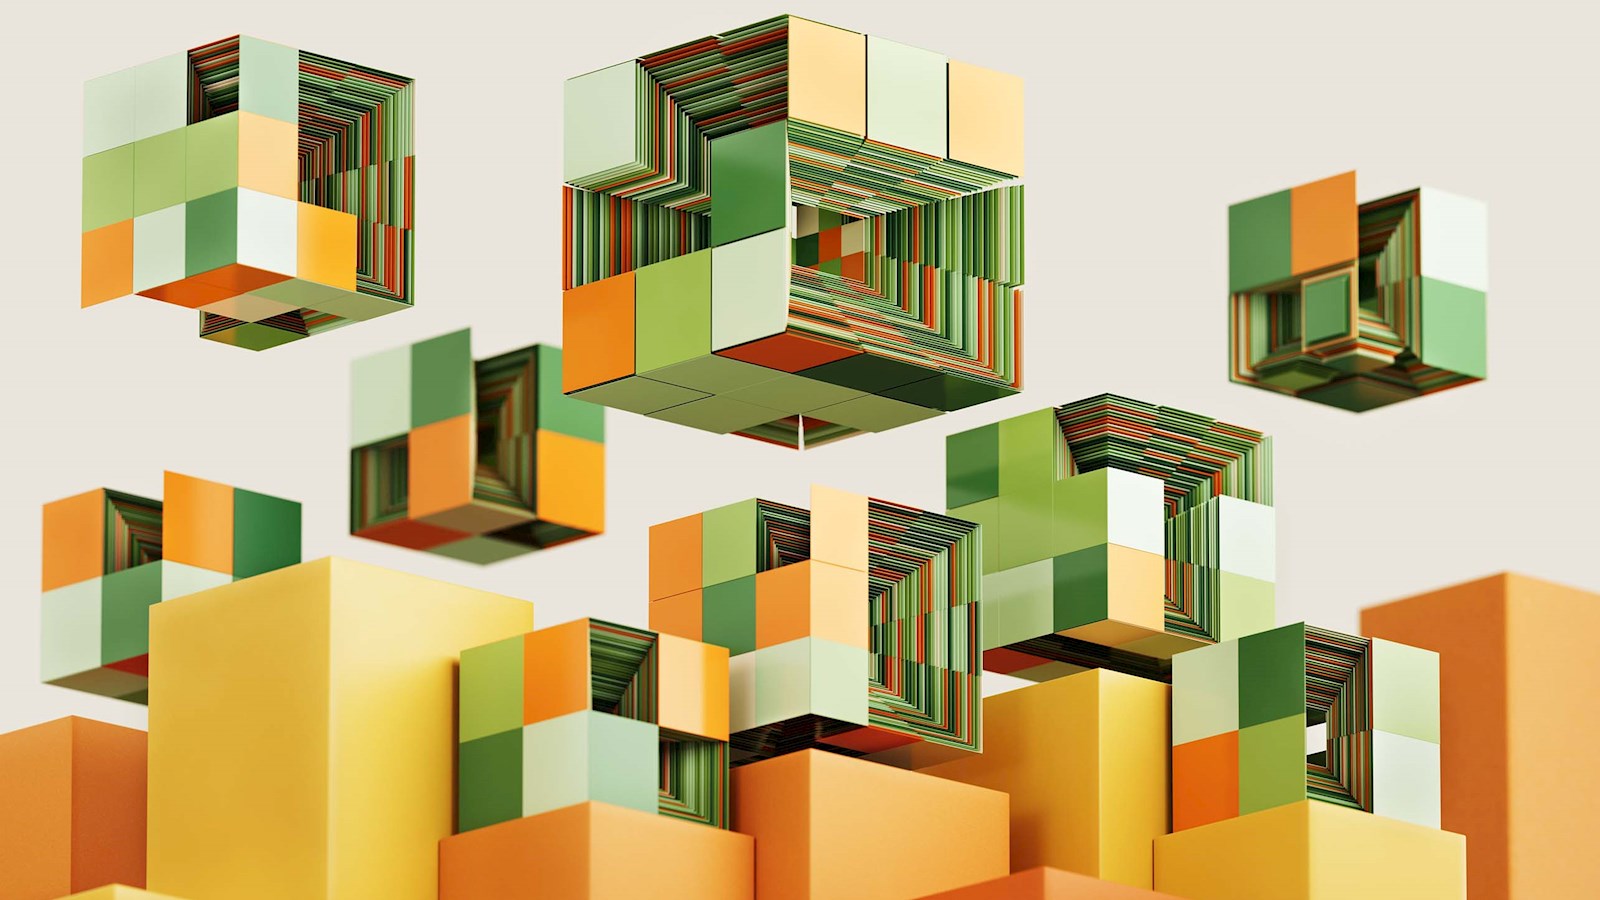 Abstract orange, yellow and green building blocks